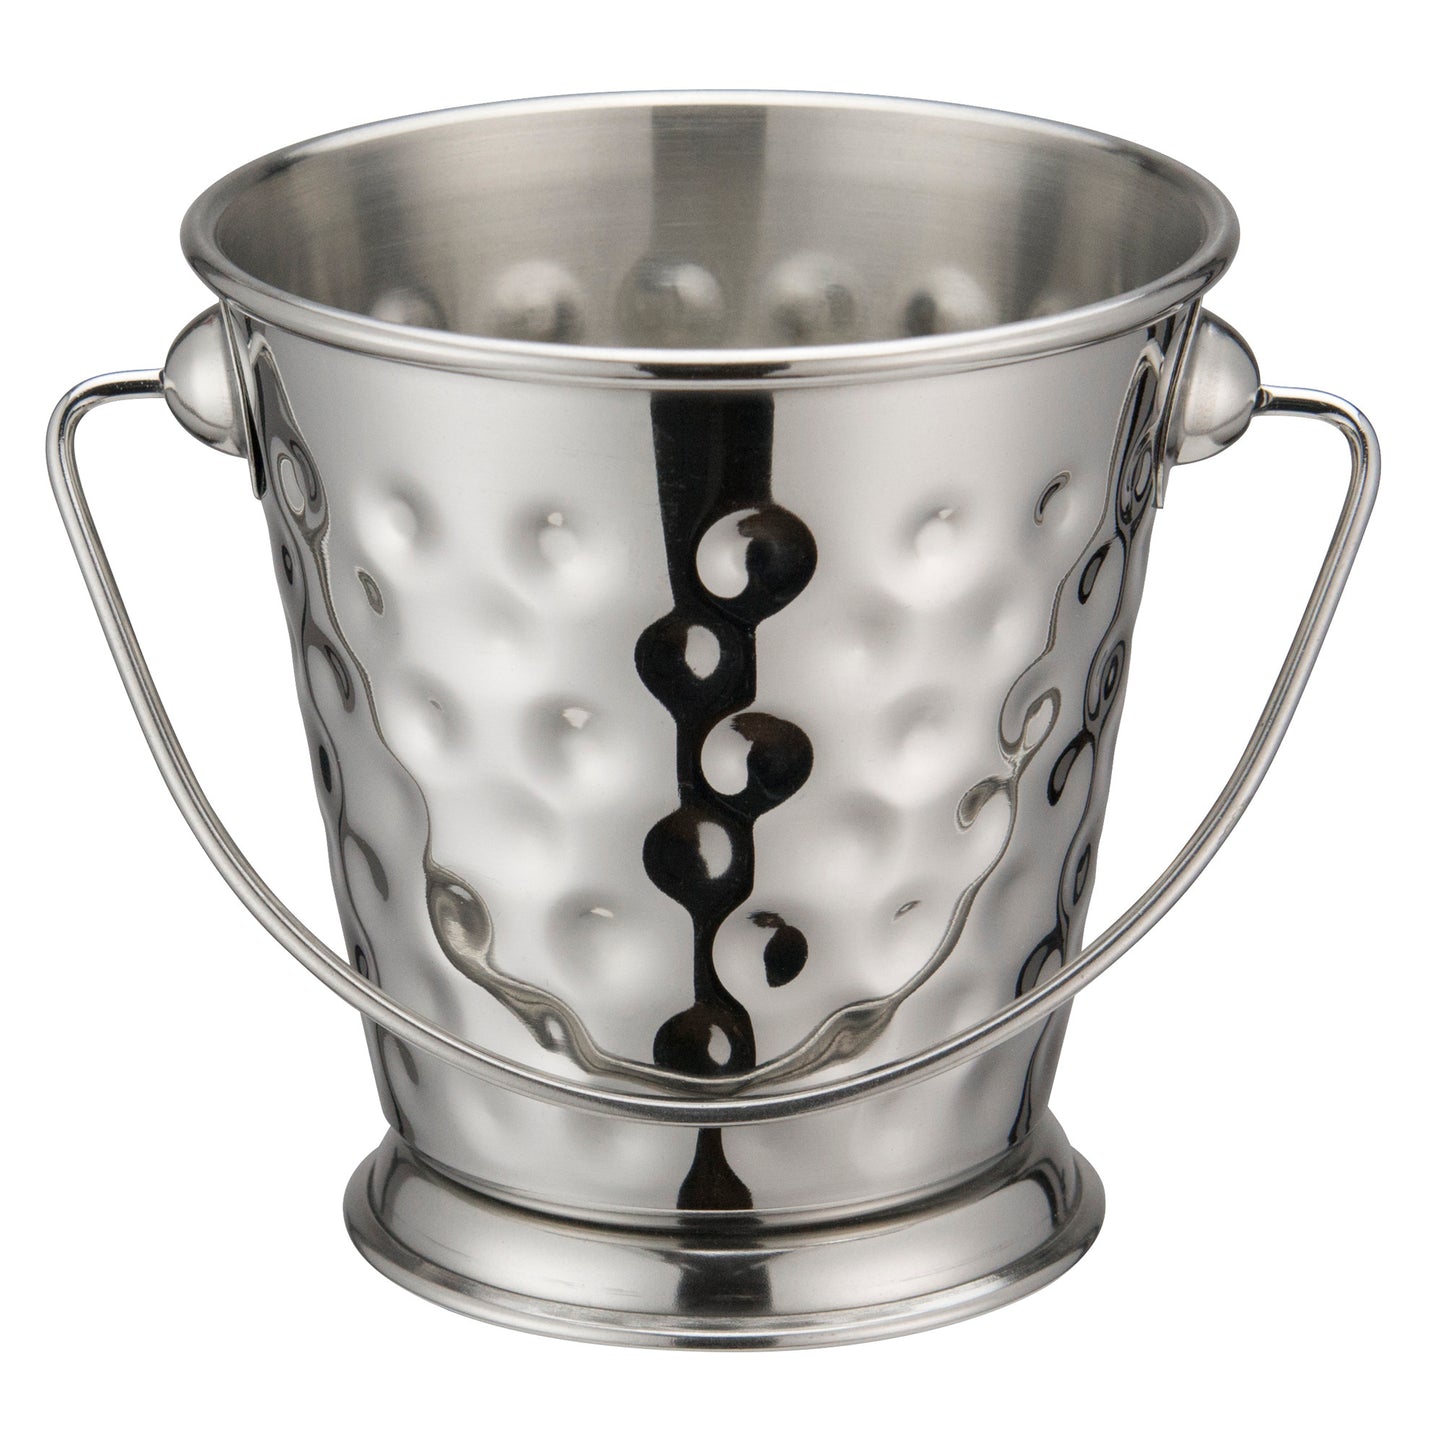 DDSA-102S - Stainless Steel Mini Pail - Hammered, 3-1/2"